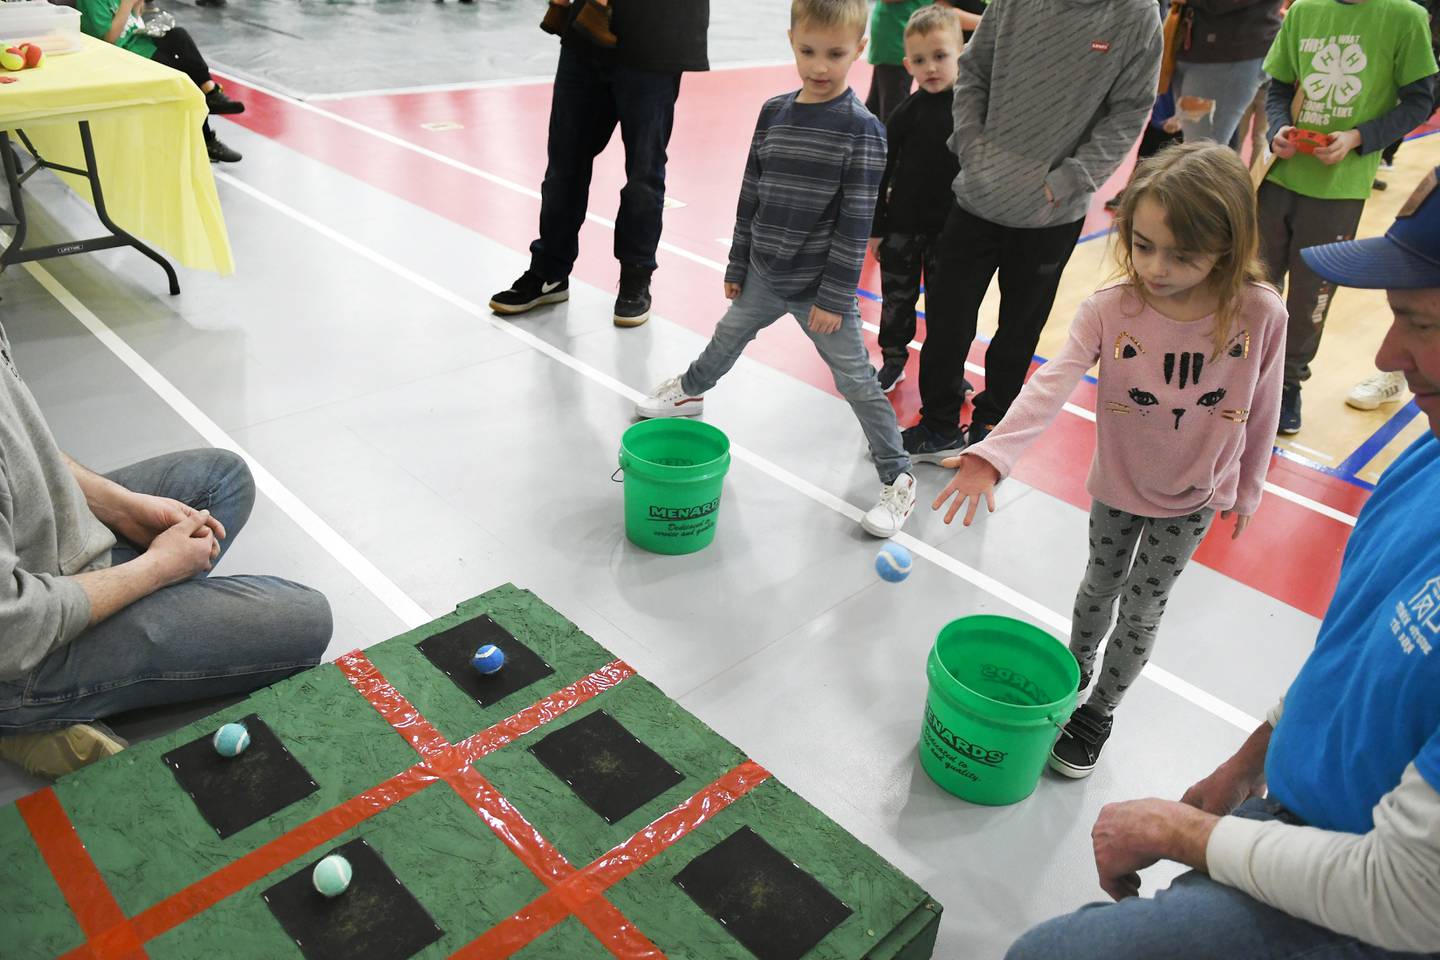 Gwenyth Stanfa, 6, of Rochelle, tosses a ball at a tic-tac-toe board as Cooper Ellison, 6, of Byron watches during the 4-H Penny Carnival on Saturday, March 18. The Pine Creek Valley 4-H Club offered this game for kids.